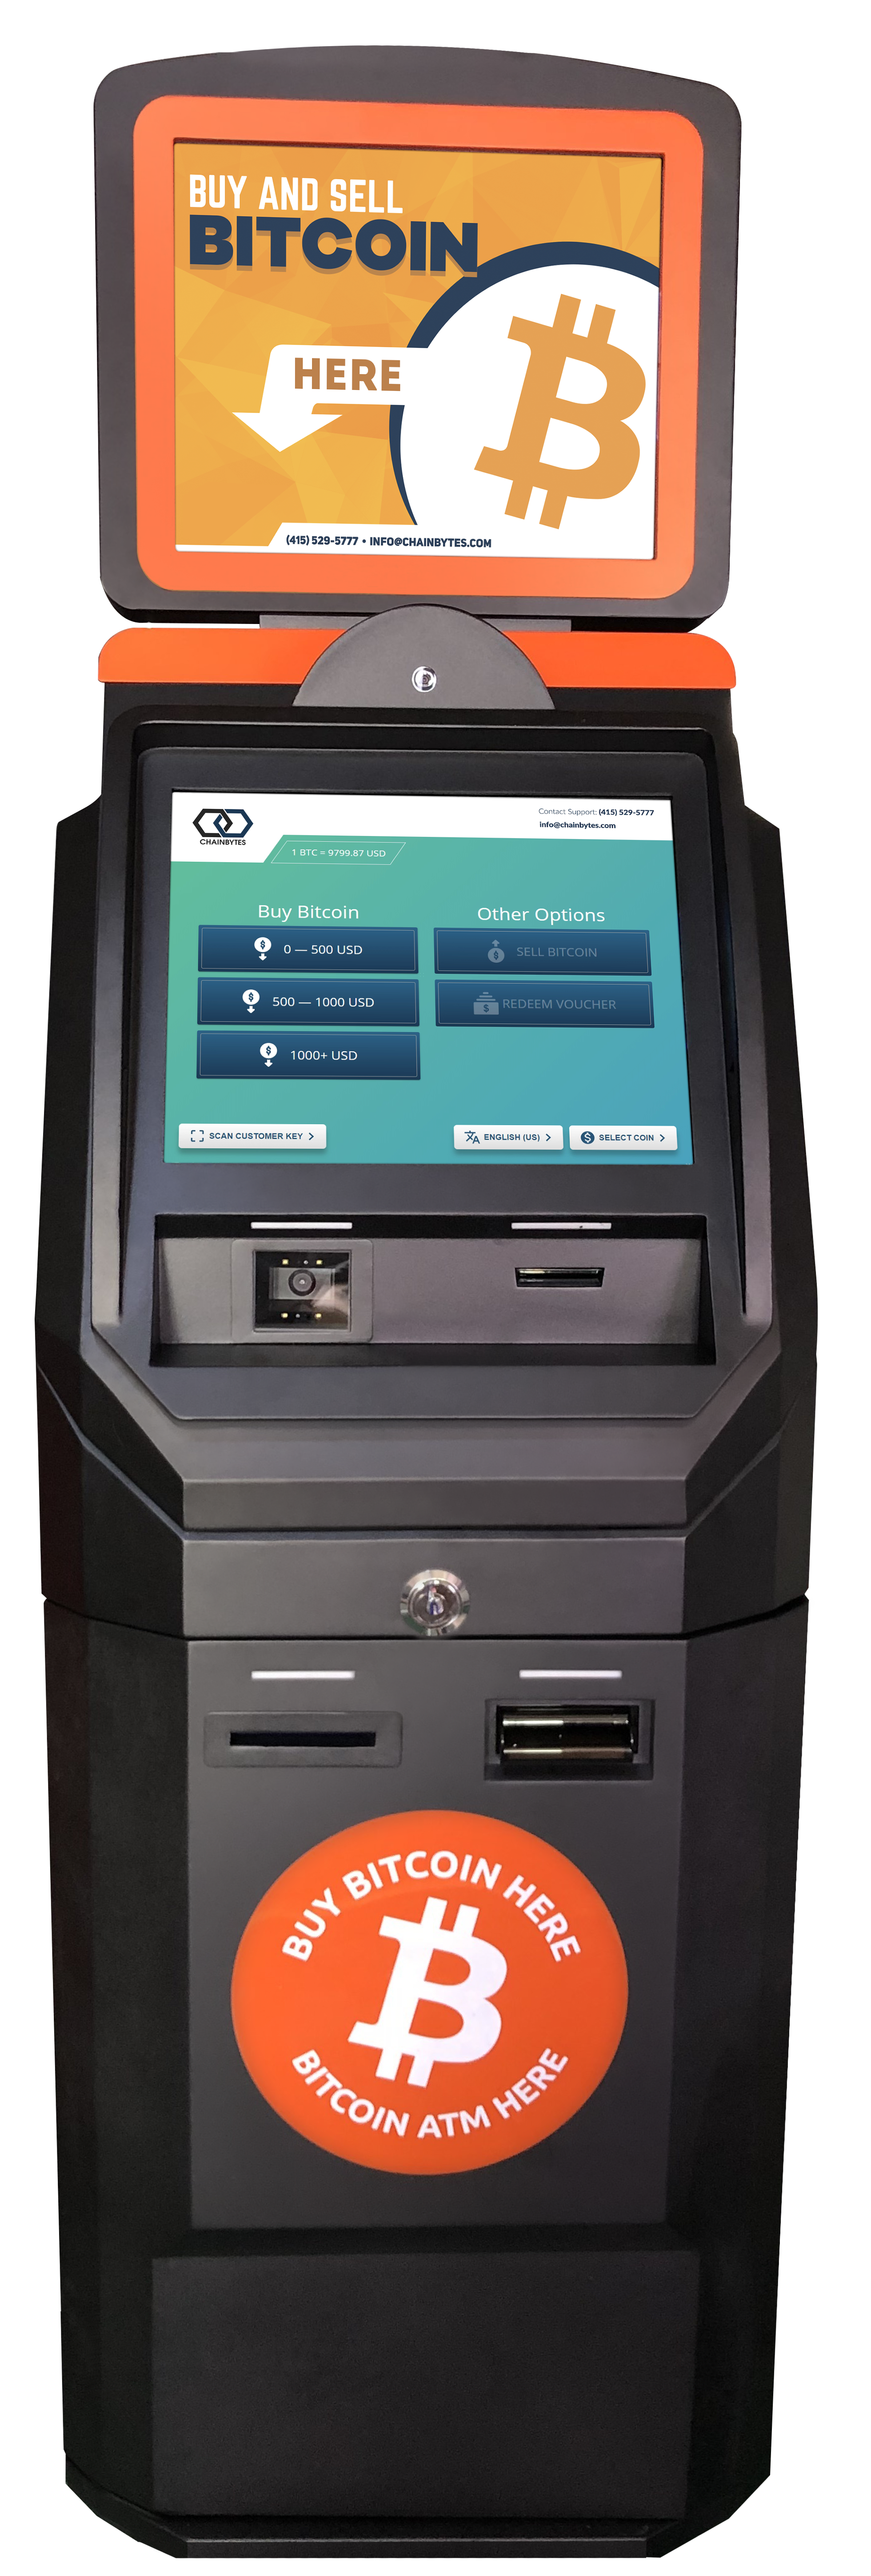 ChainBytes Bitcoin ATM for 2 way transactions f